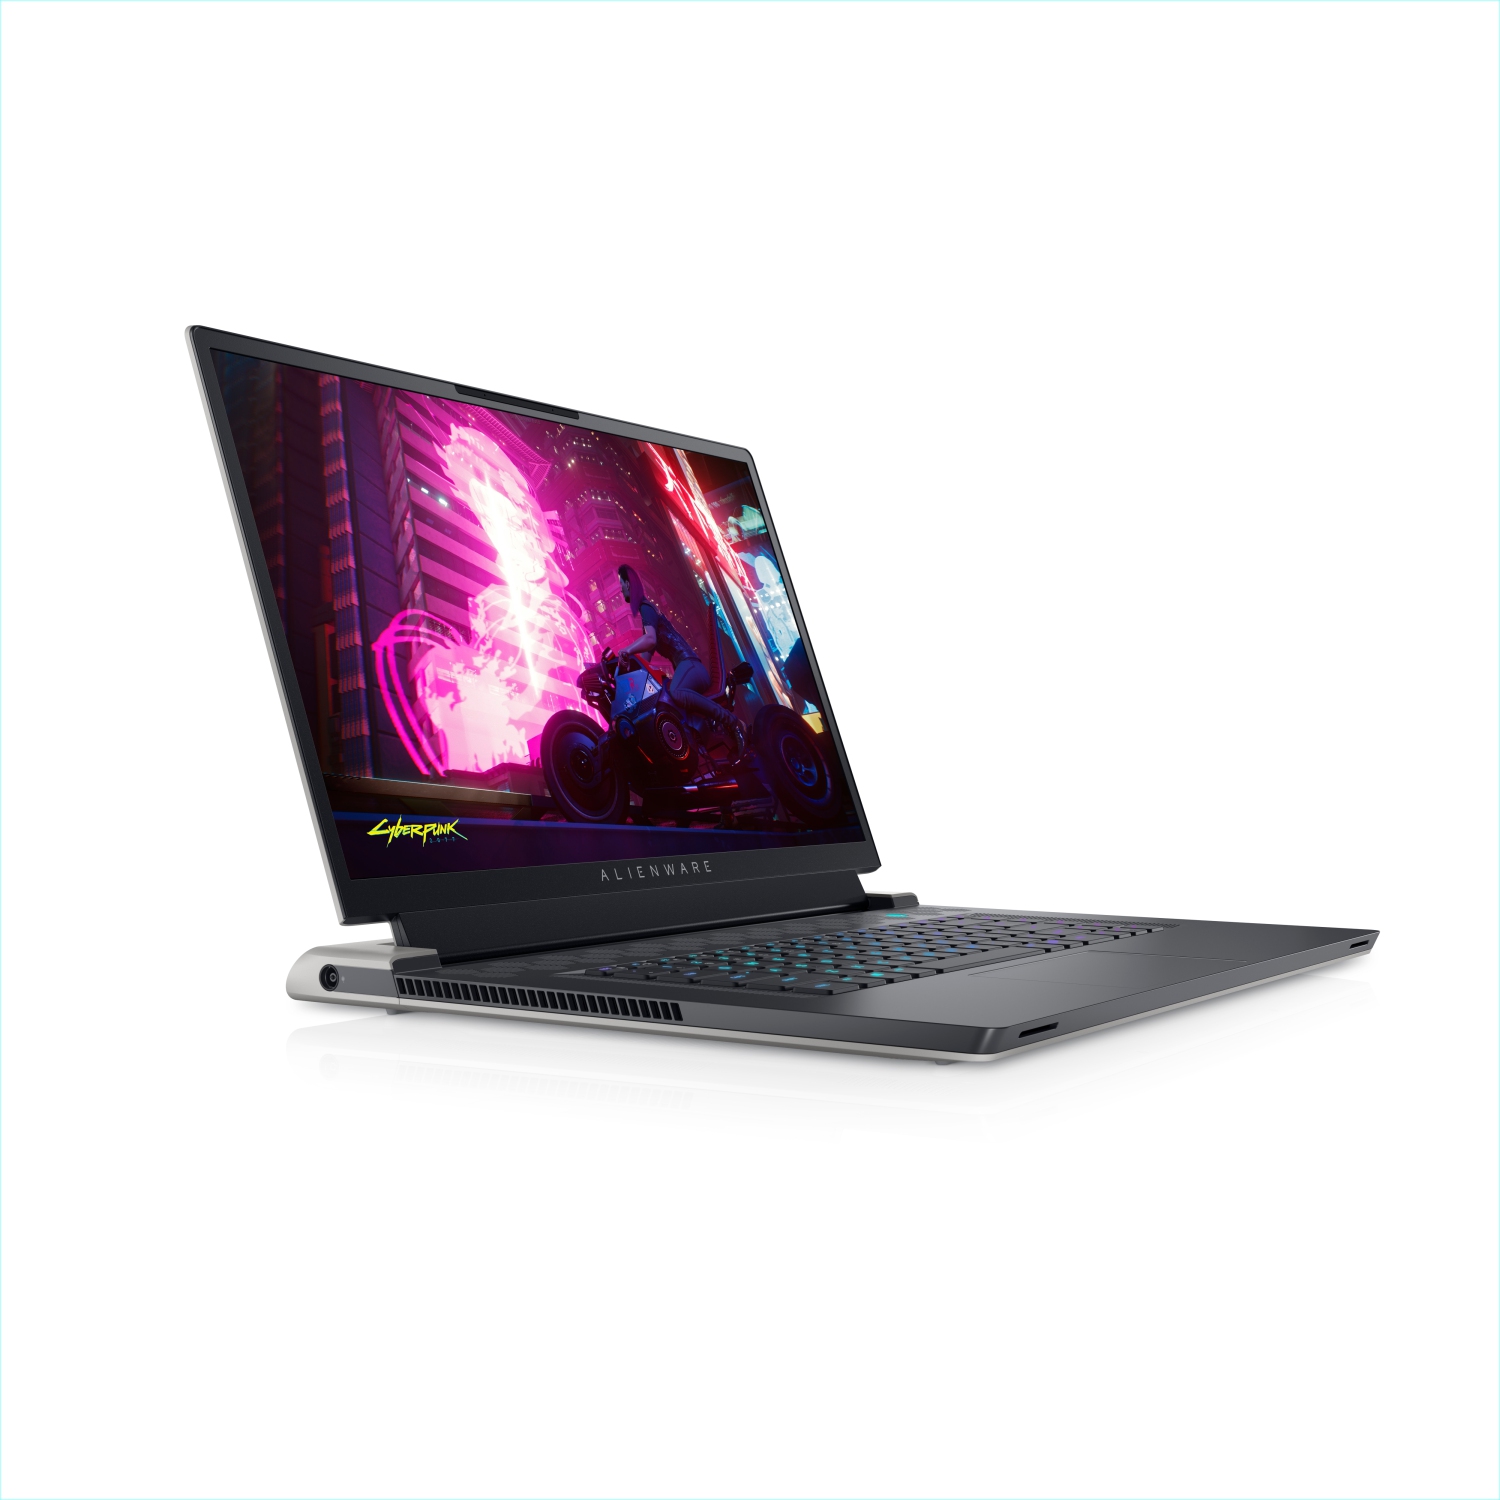 Refurbished (Excellent) - Dell Alienware X17 R1 Gaming Laptop (2021), 17.3" 4K, Core i7, 2TB SSD, 32GB RAM, RTX 3060, 8 Cores @ 4.6 GHz, 11th Gen CPU Certified